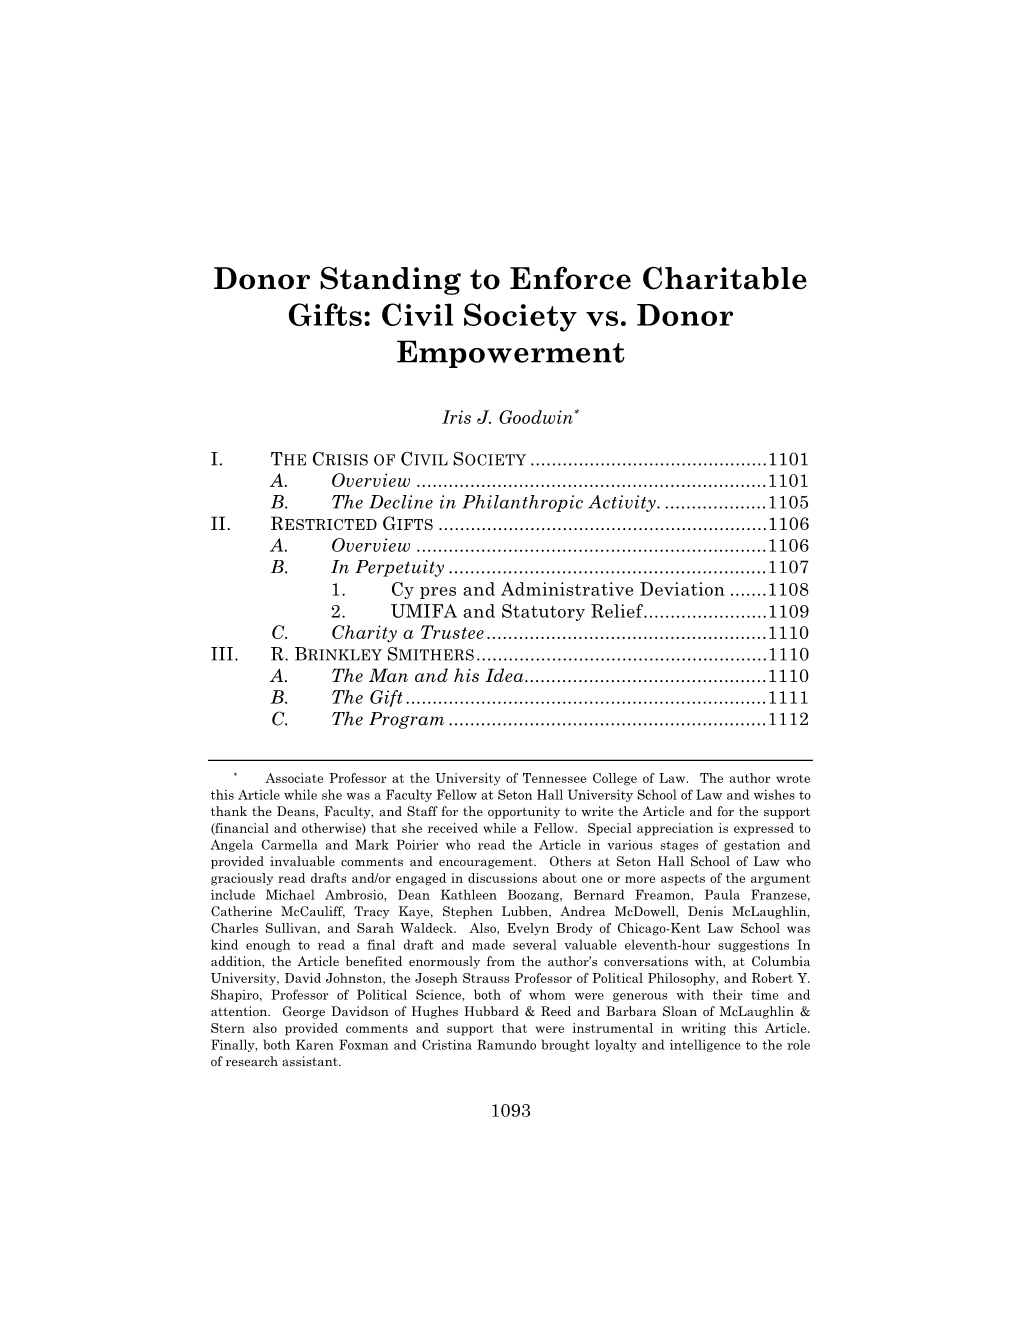 Donor Standing to Enforce Charitable Gifts: Civil Society Vs